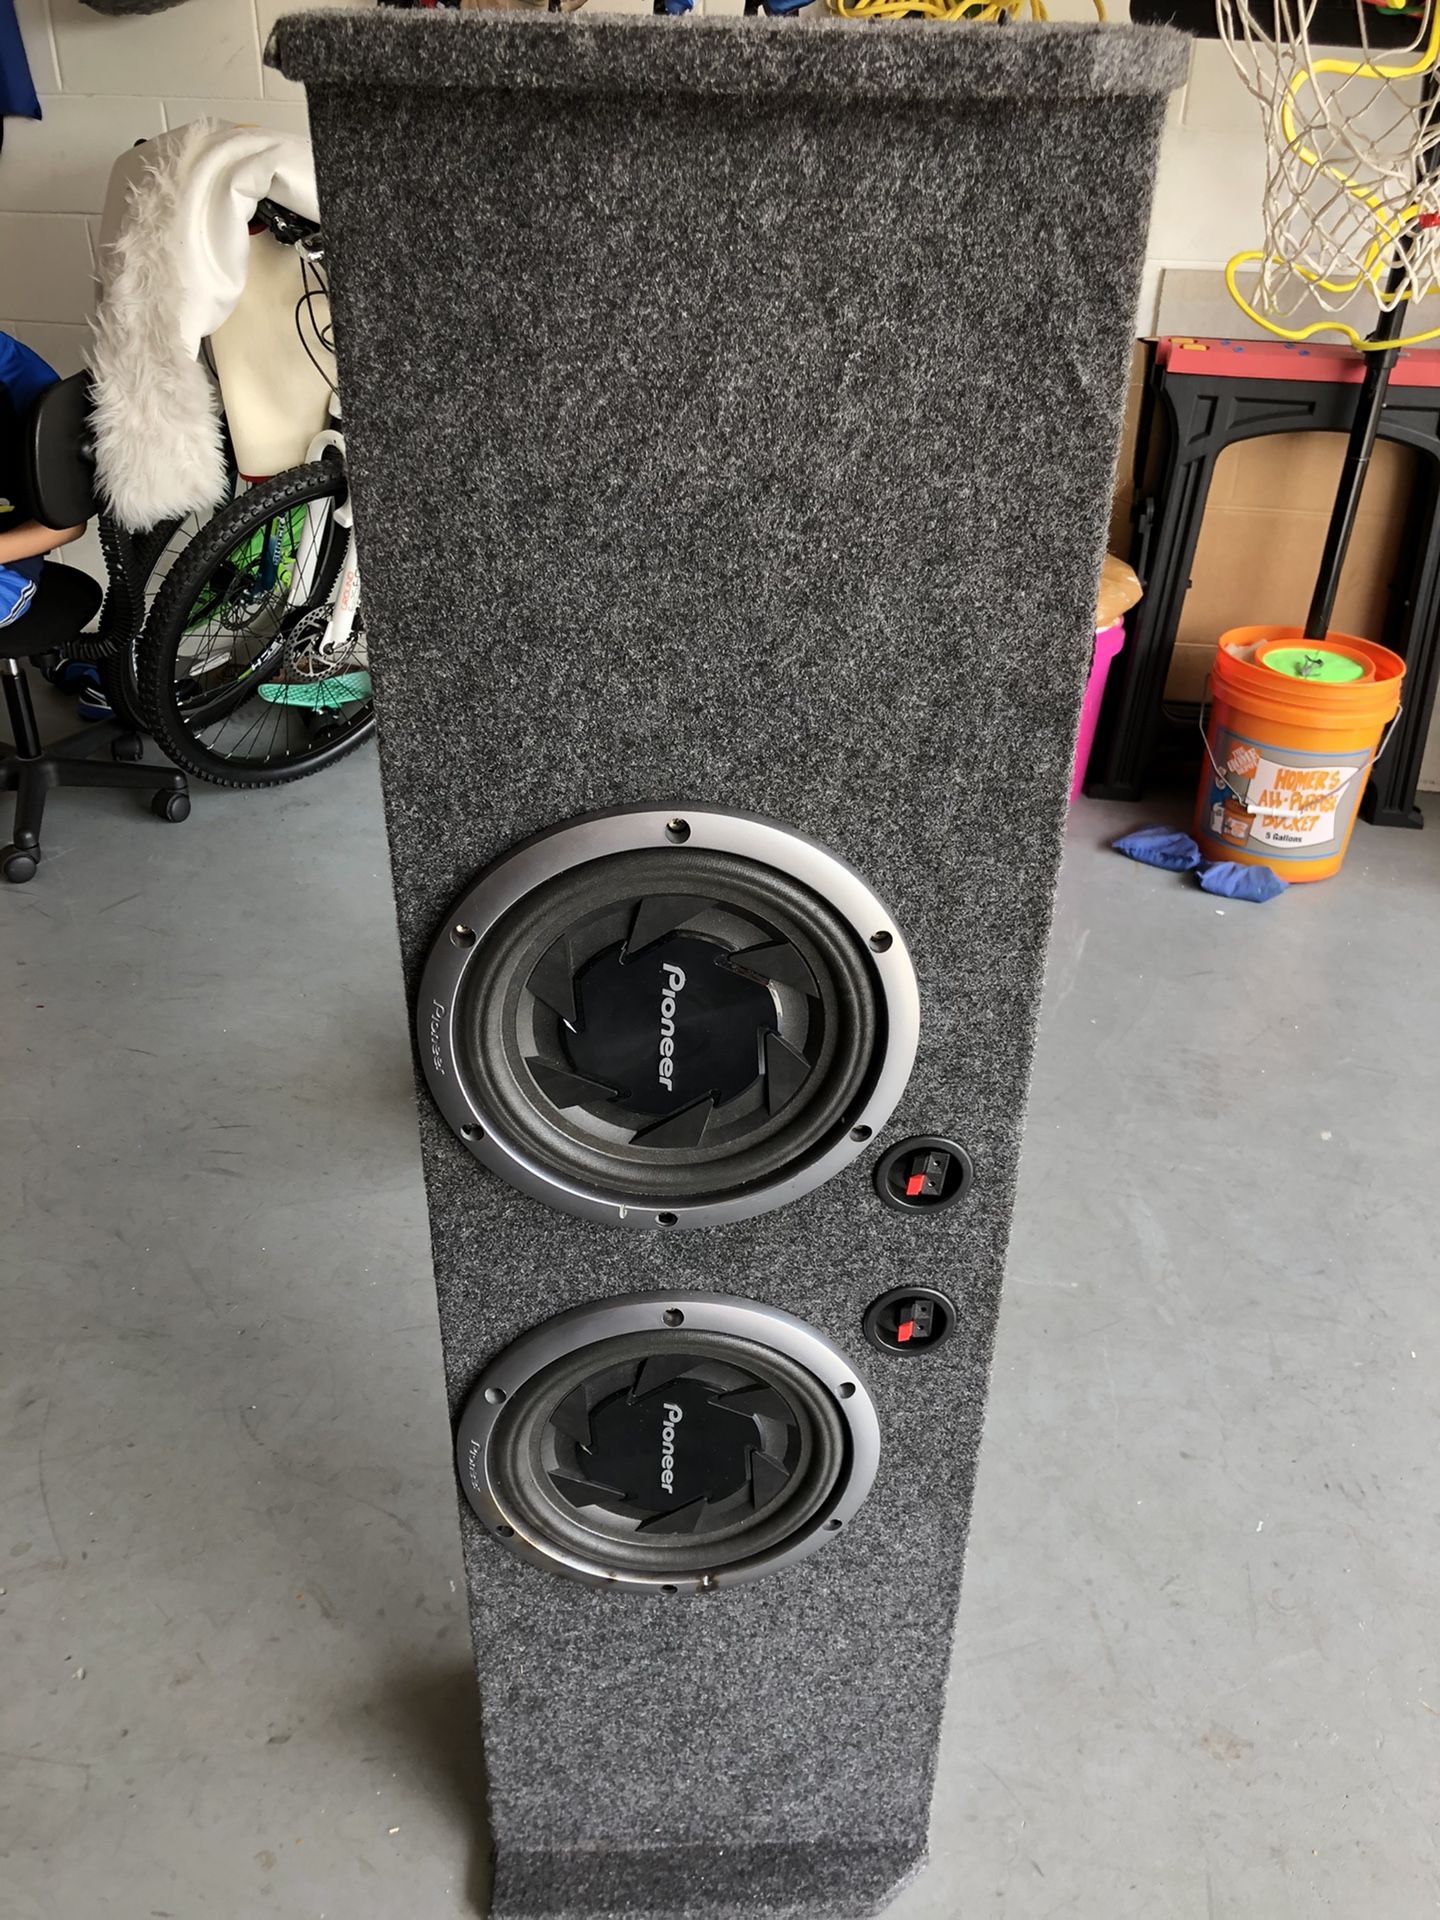 2 Pioneer 10s sub woofers in a enclosure box